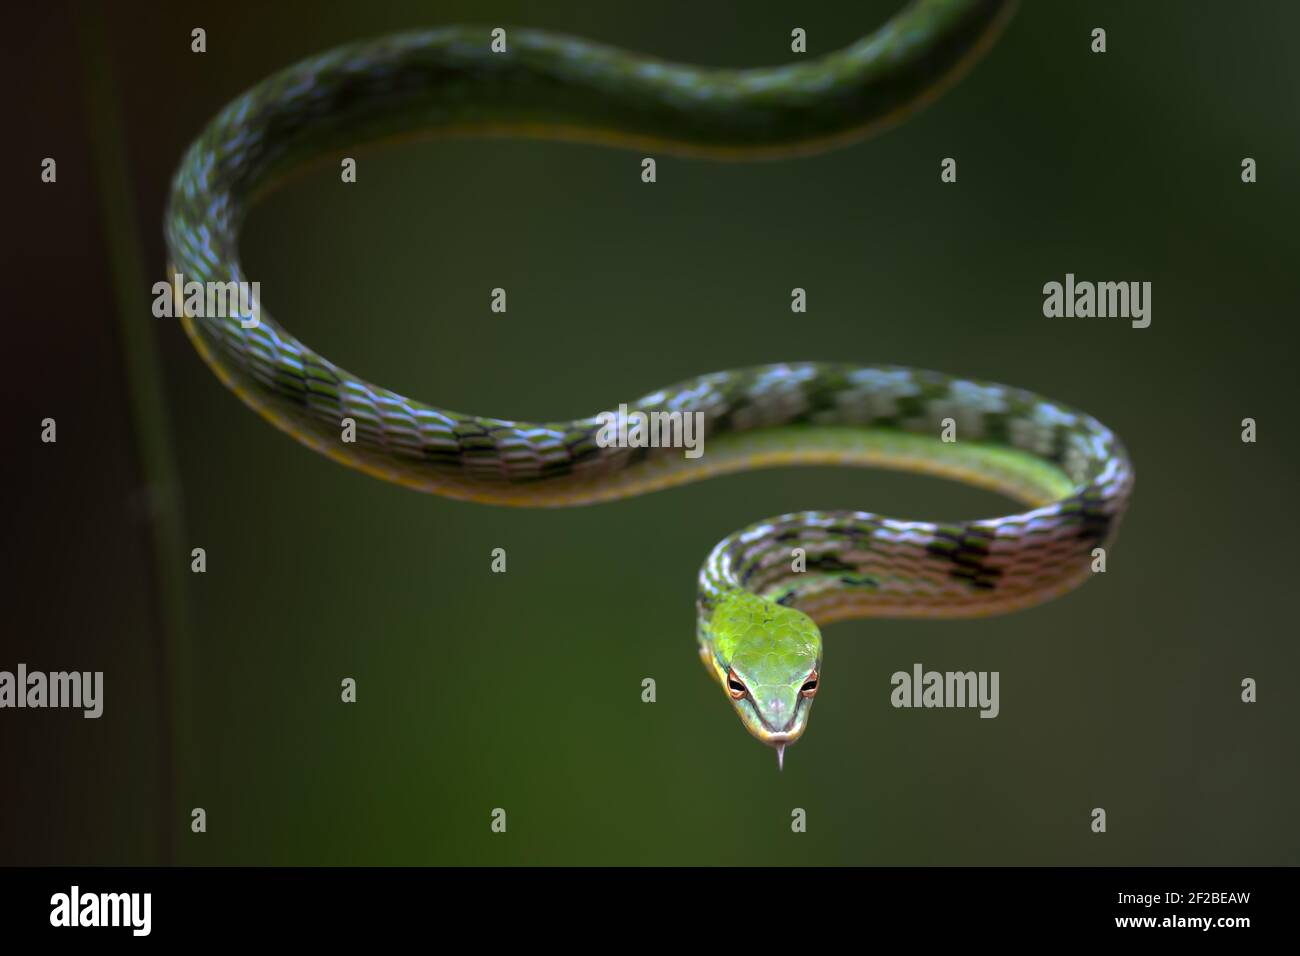 Asian vine snake on a tree branch, Indonesia Stock Photo